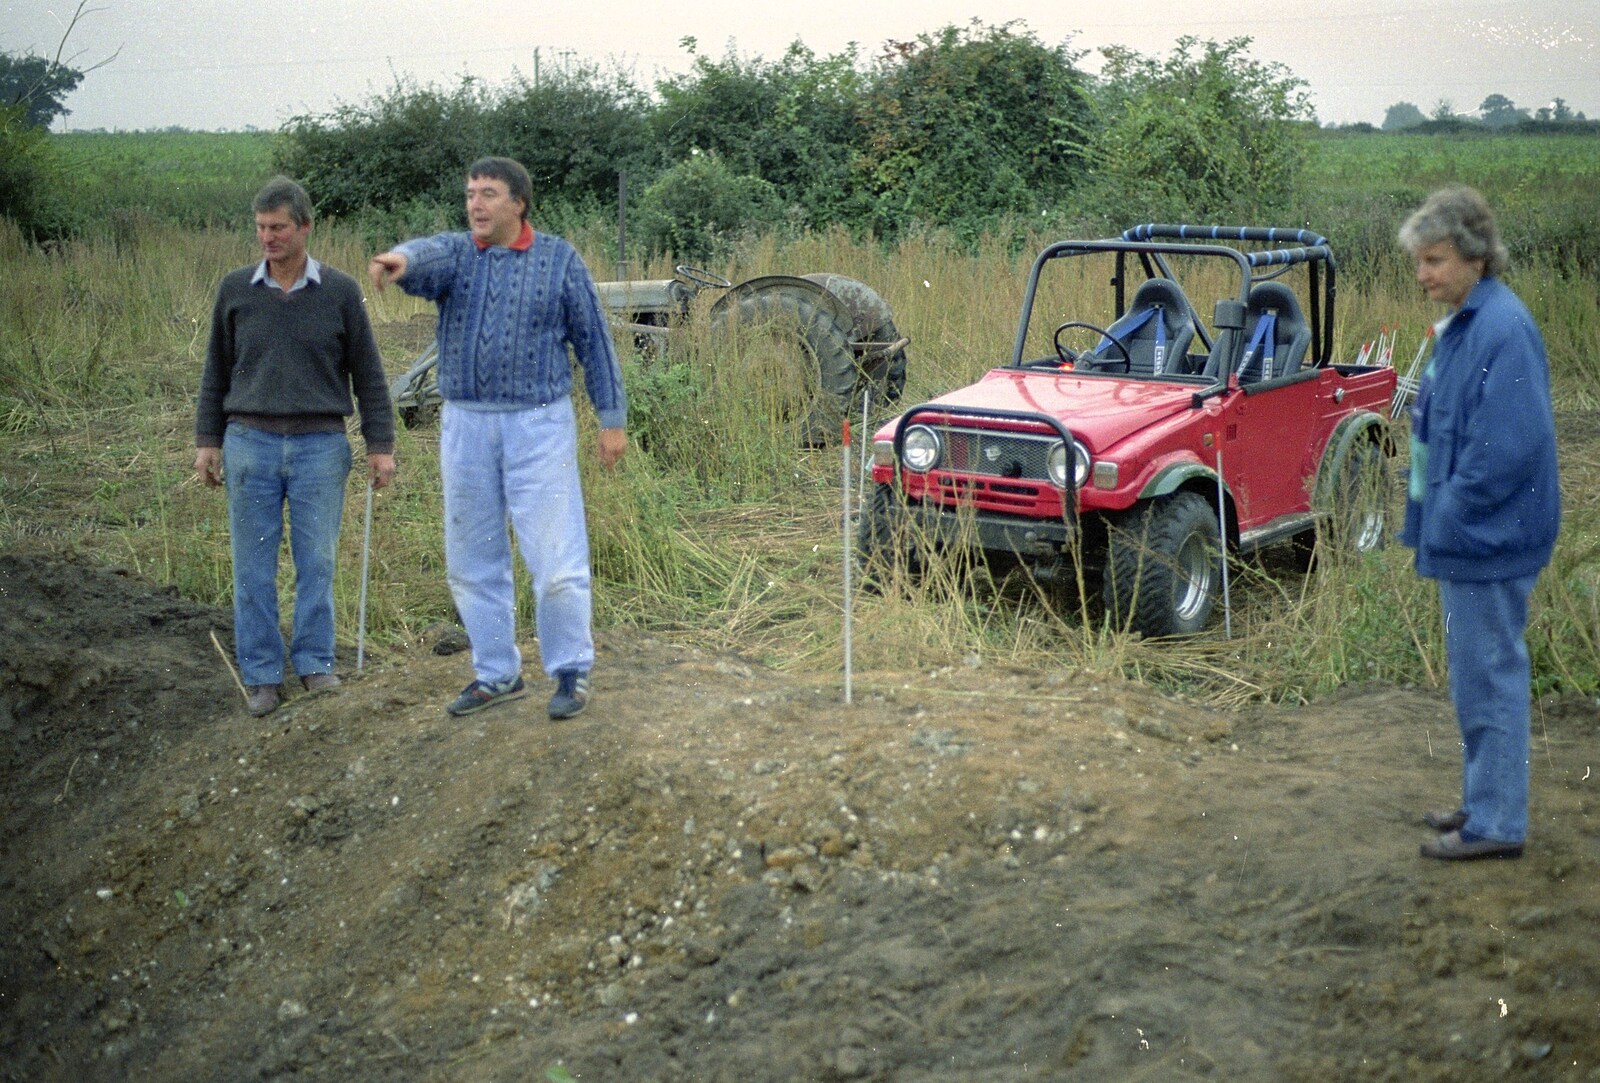 Corky points something out from Off-roading with Geoff and Brenda, Stuston and Elsewhere, Suffolk - 15th September 1995